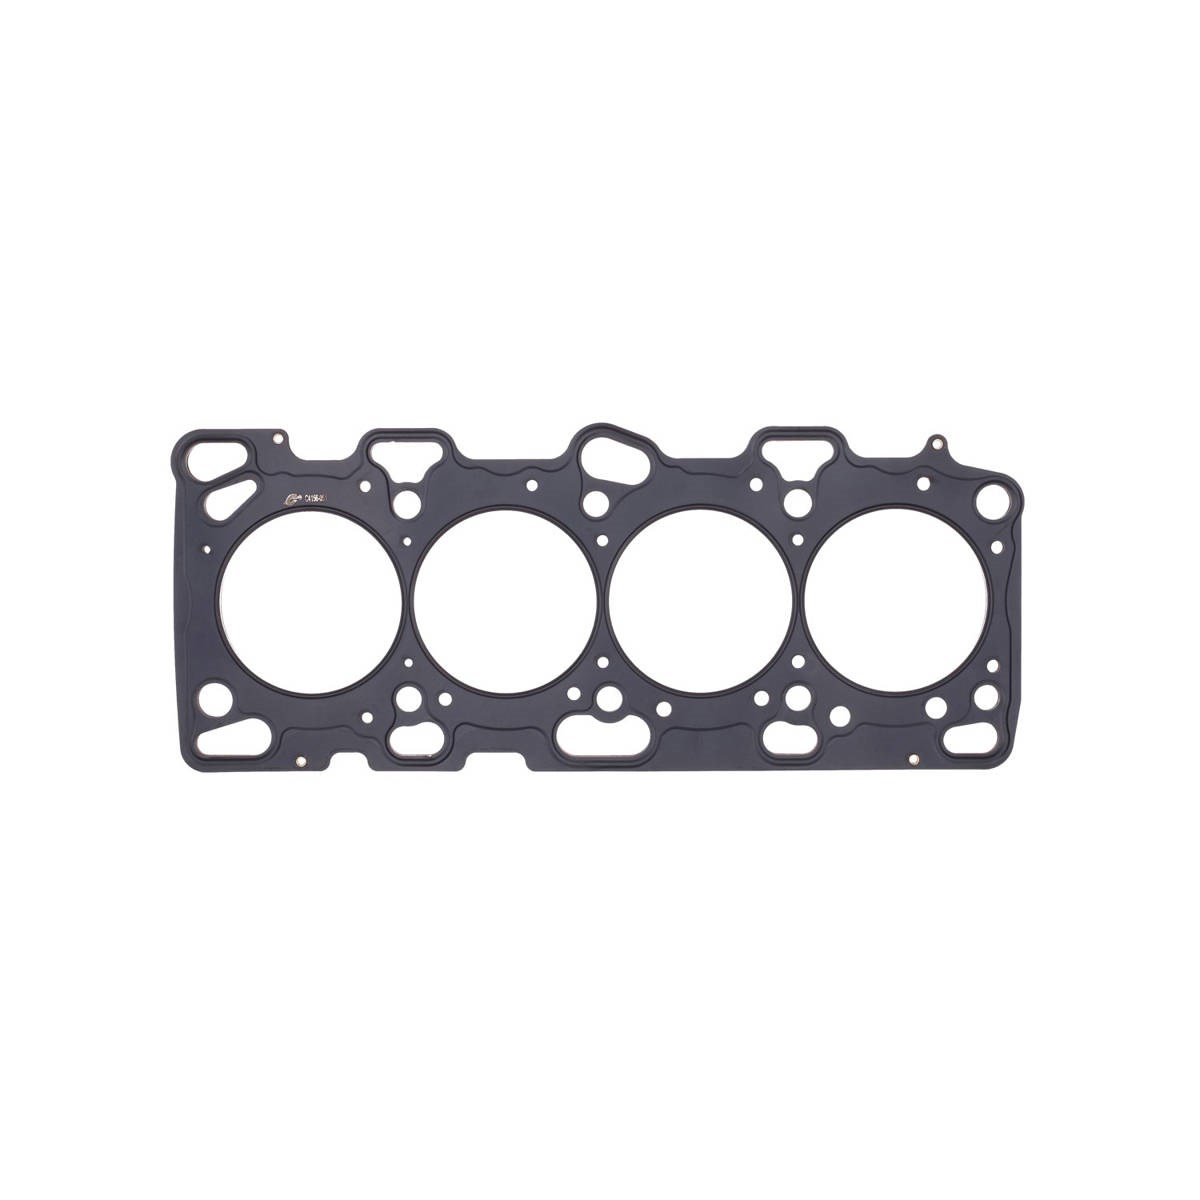 Cylinder Head Gasket Mitsubishi 4G63T .060" MLS , 87mm Bore, DOHC, Evo 4-8 ONLY Cometic C4591-060